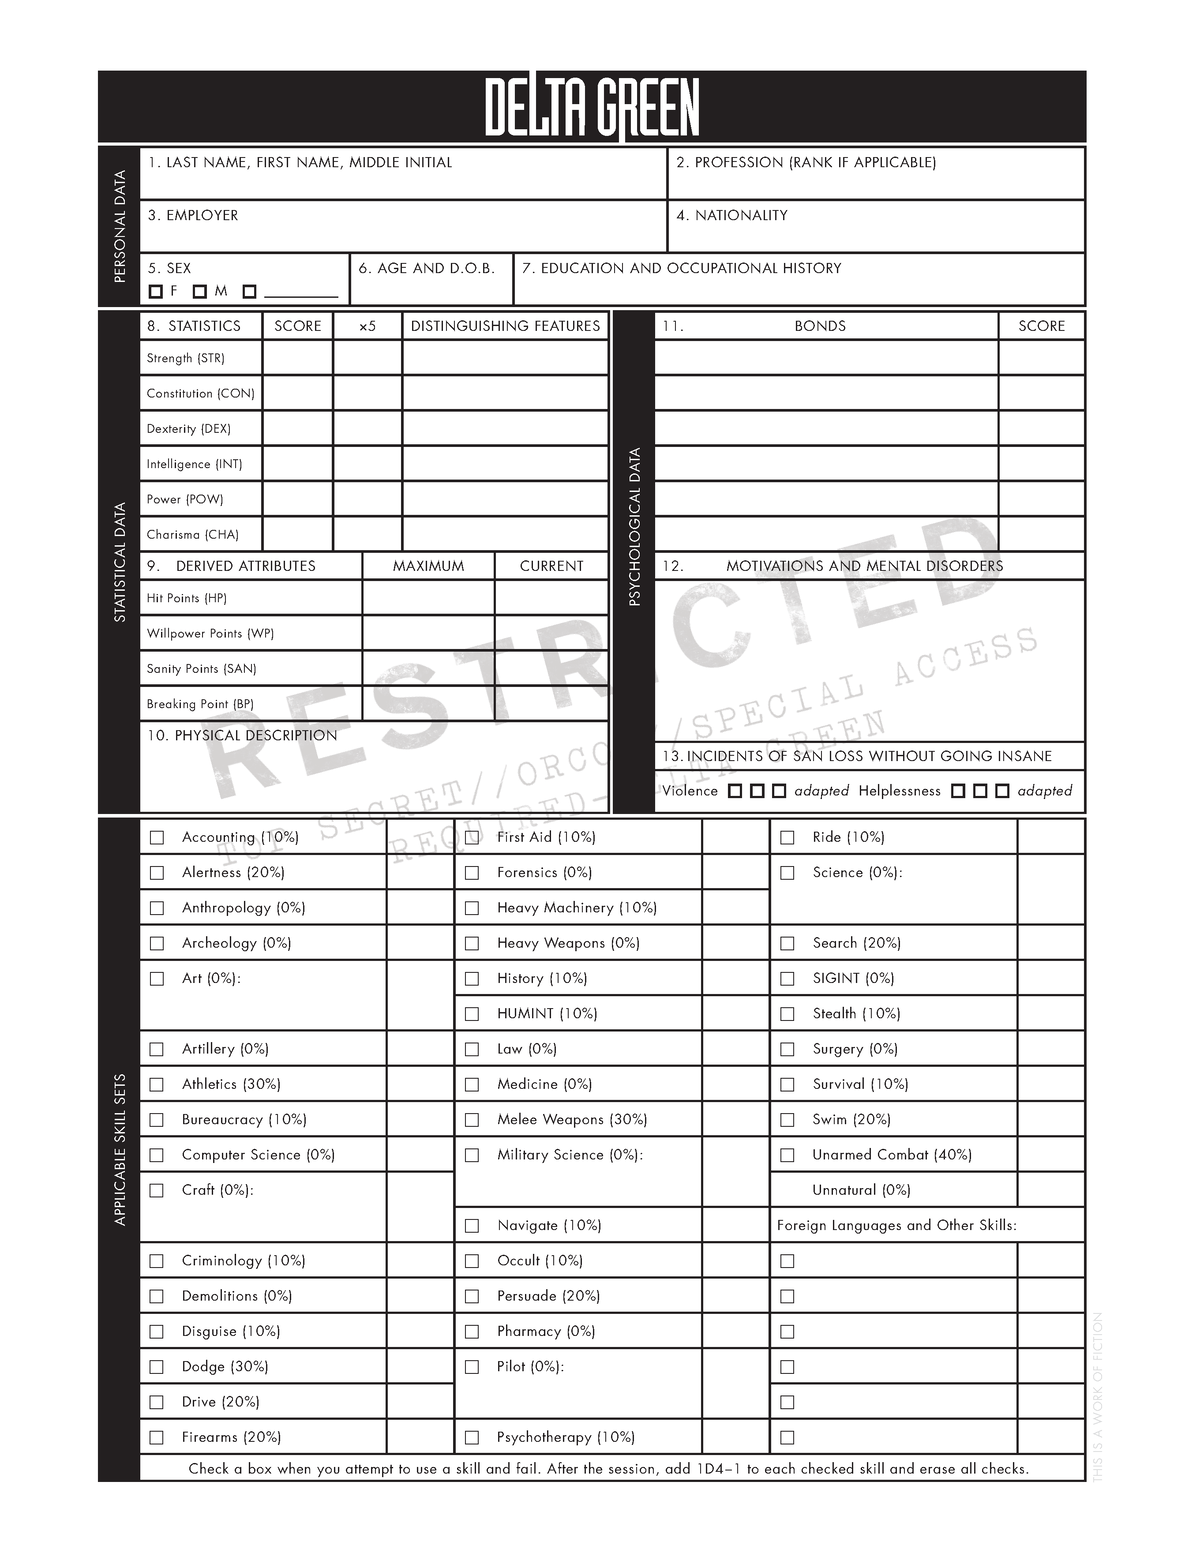 Delta Green RPG Character Sheet - THIS IS A WORK OF FICTION PERSONAL ...